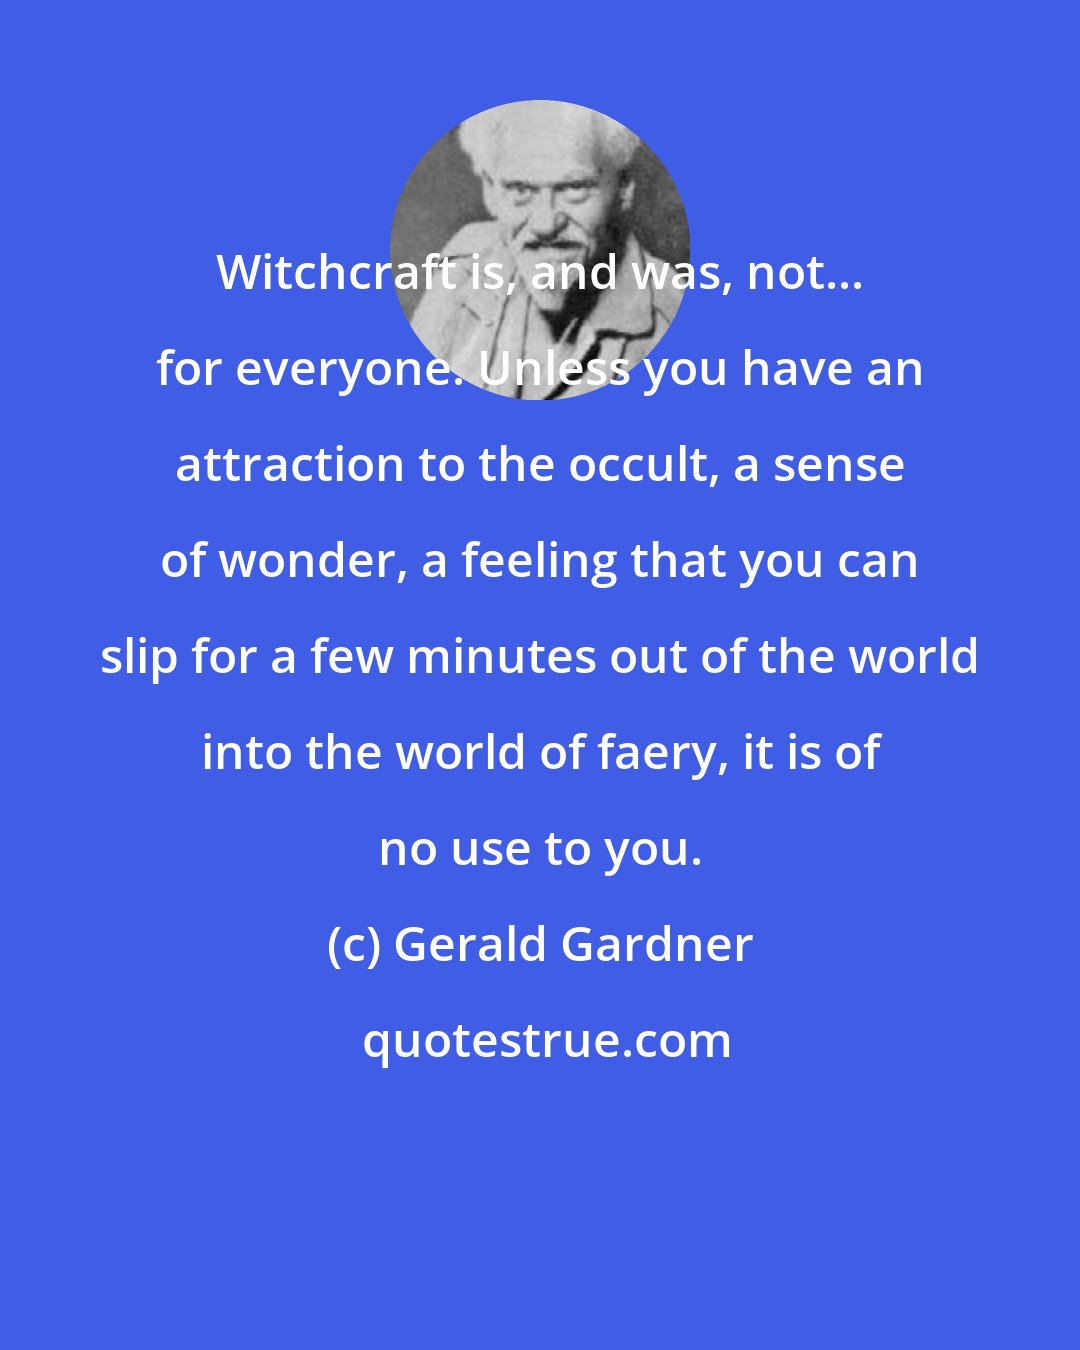 Gerald Gardner: Witchcraft is, and was, not... for everyone. Unless you have an attraction to the occult, a sense of wonder, a feeling that you can slip for a few minutes out of the world into the world of faery, it is of no use to you.